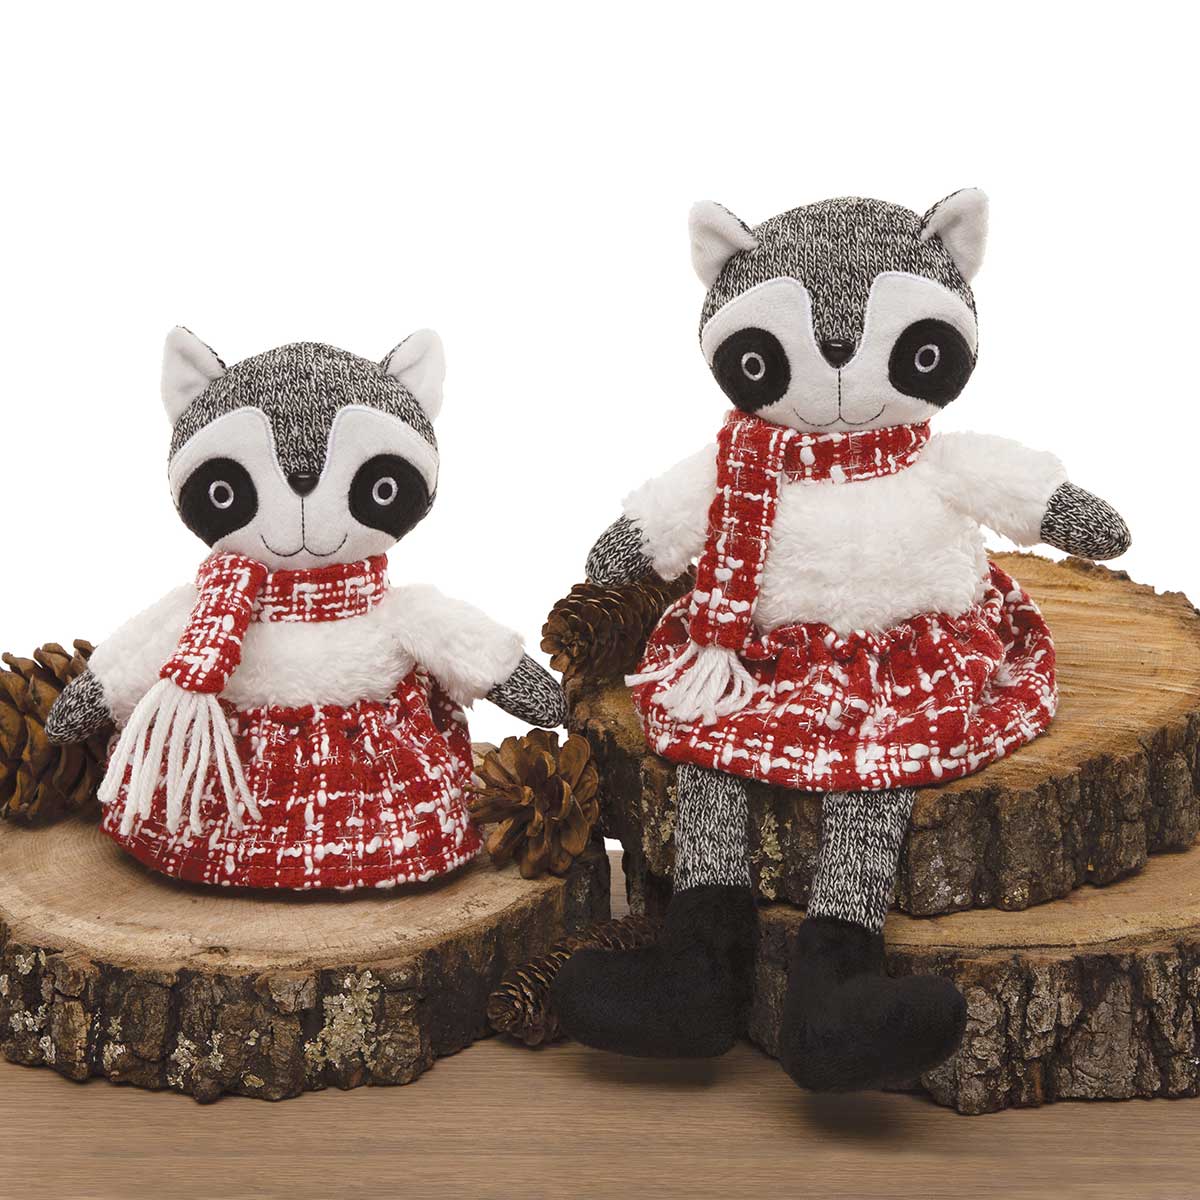 RACCOON WINTER CRITTER GIRL 6IN X 8IN RED/WHITE/GREY